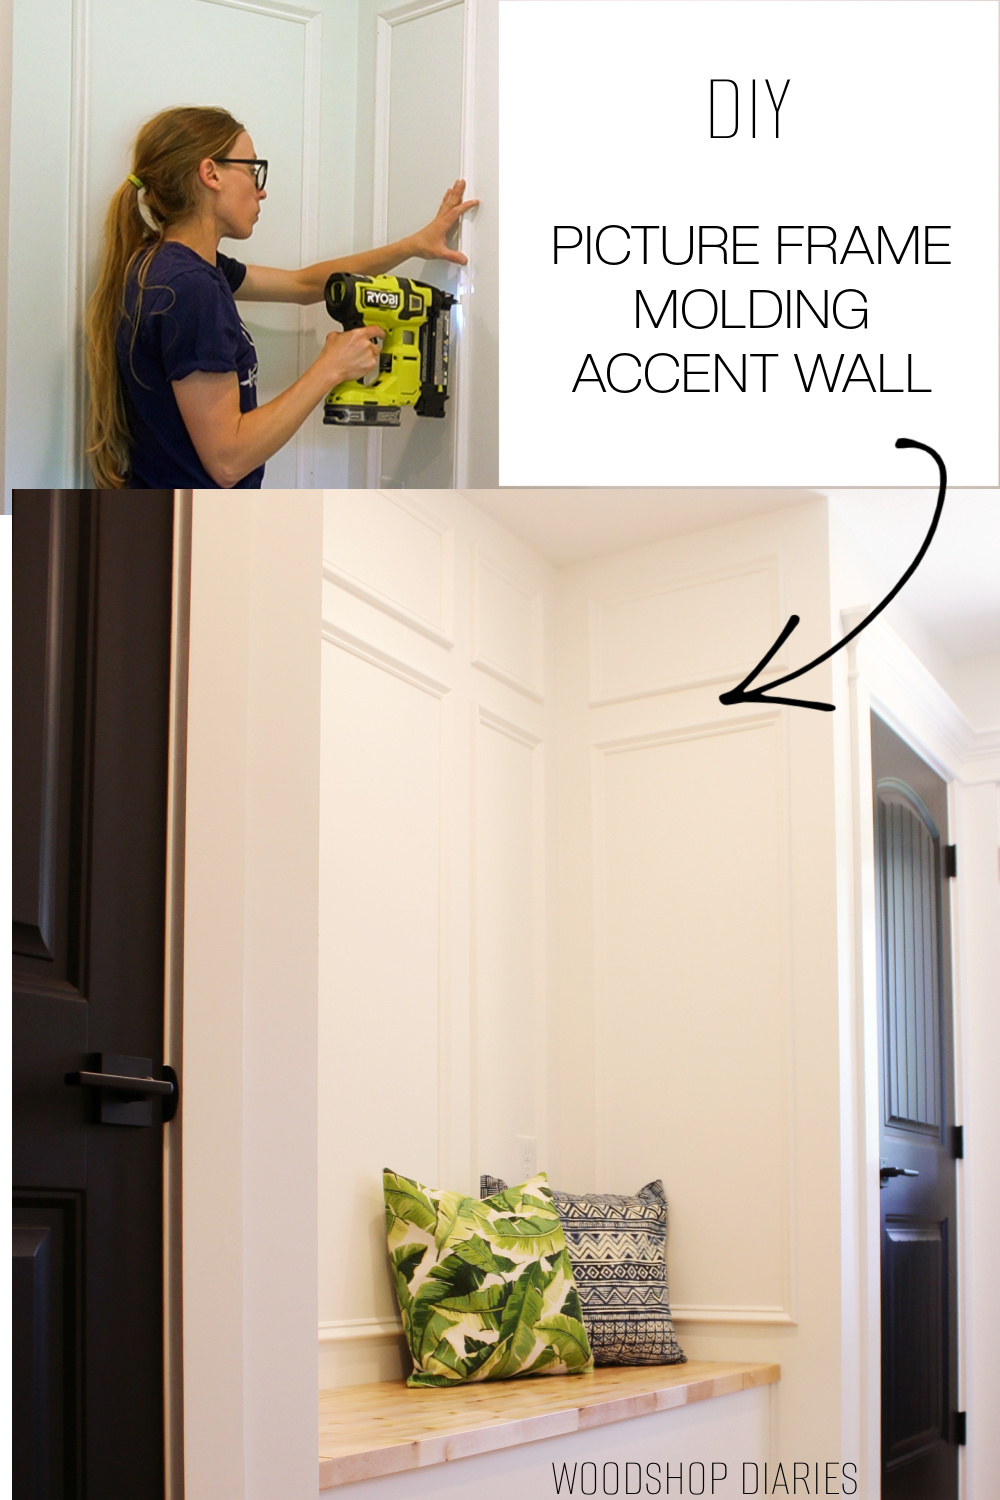 Pinterest collage image showing Shara installing picture frame molding using nail gun at top and completed accent wall at bottom with text "DIY picture frame molding accent wall"